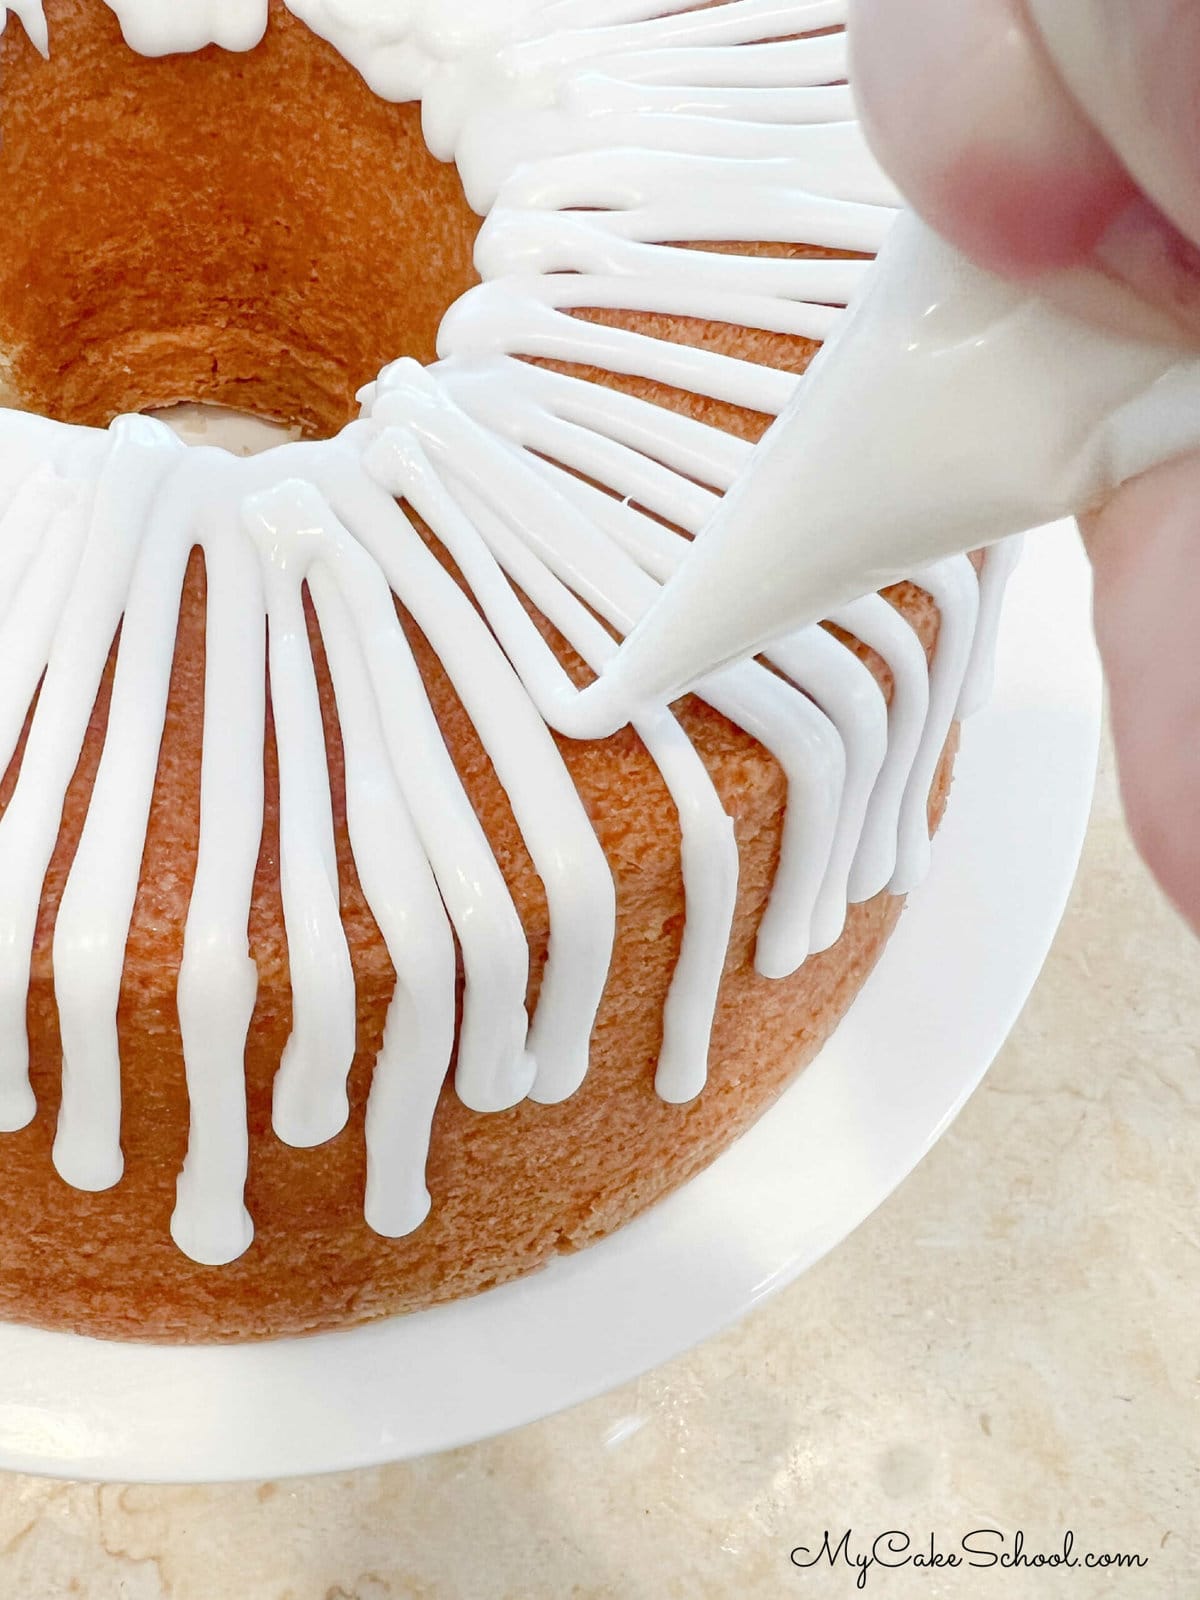 Applying Coconut Glaze to Pound Cake with Piping Bag